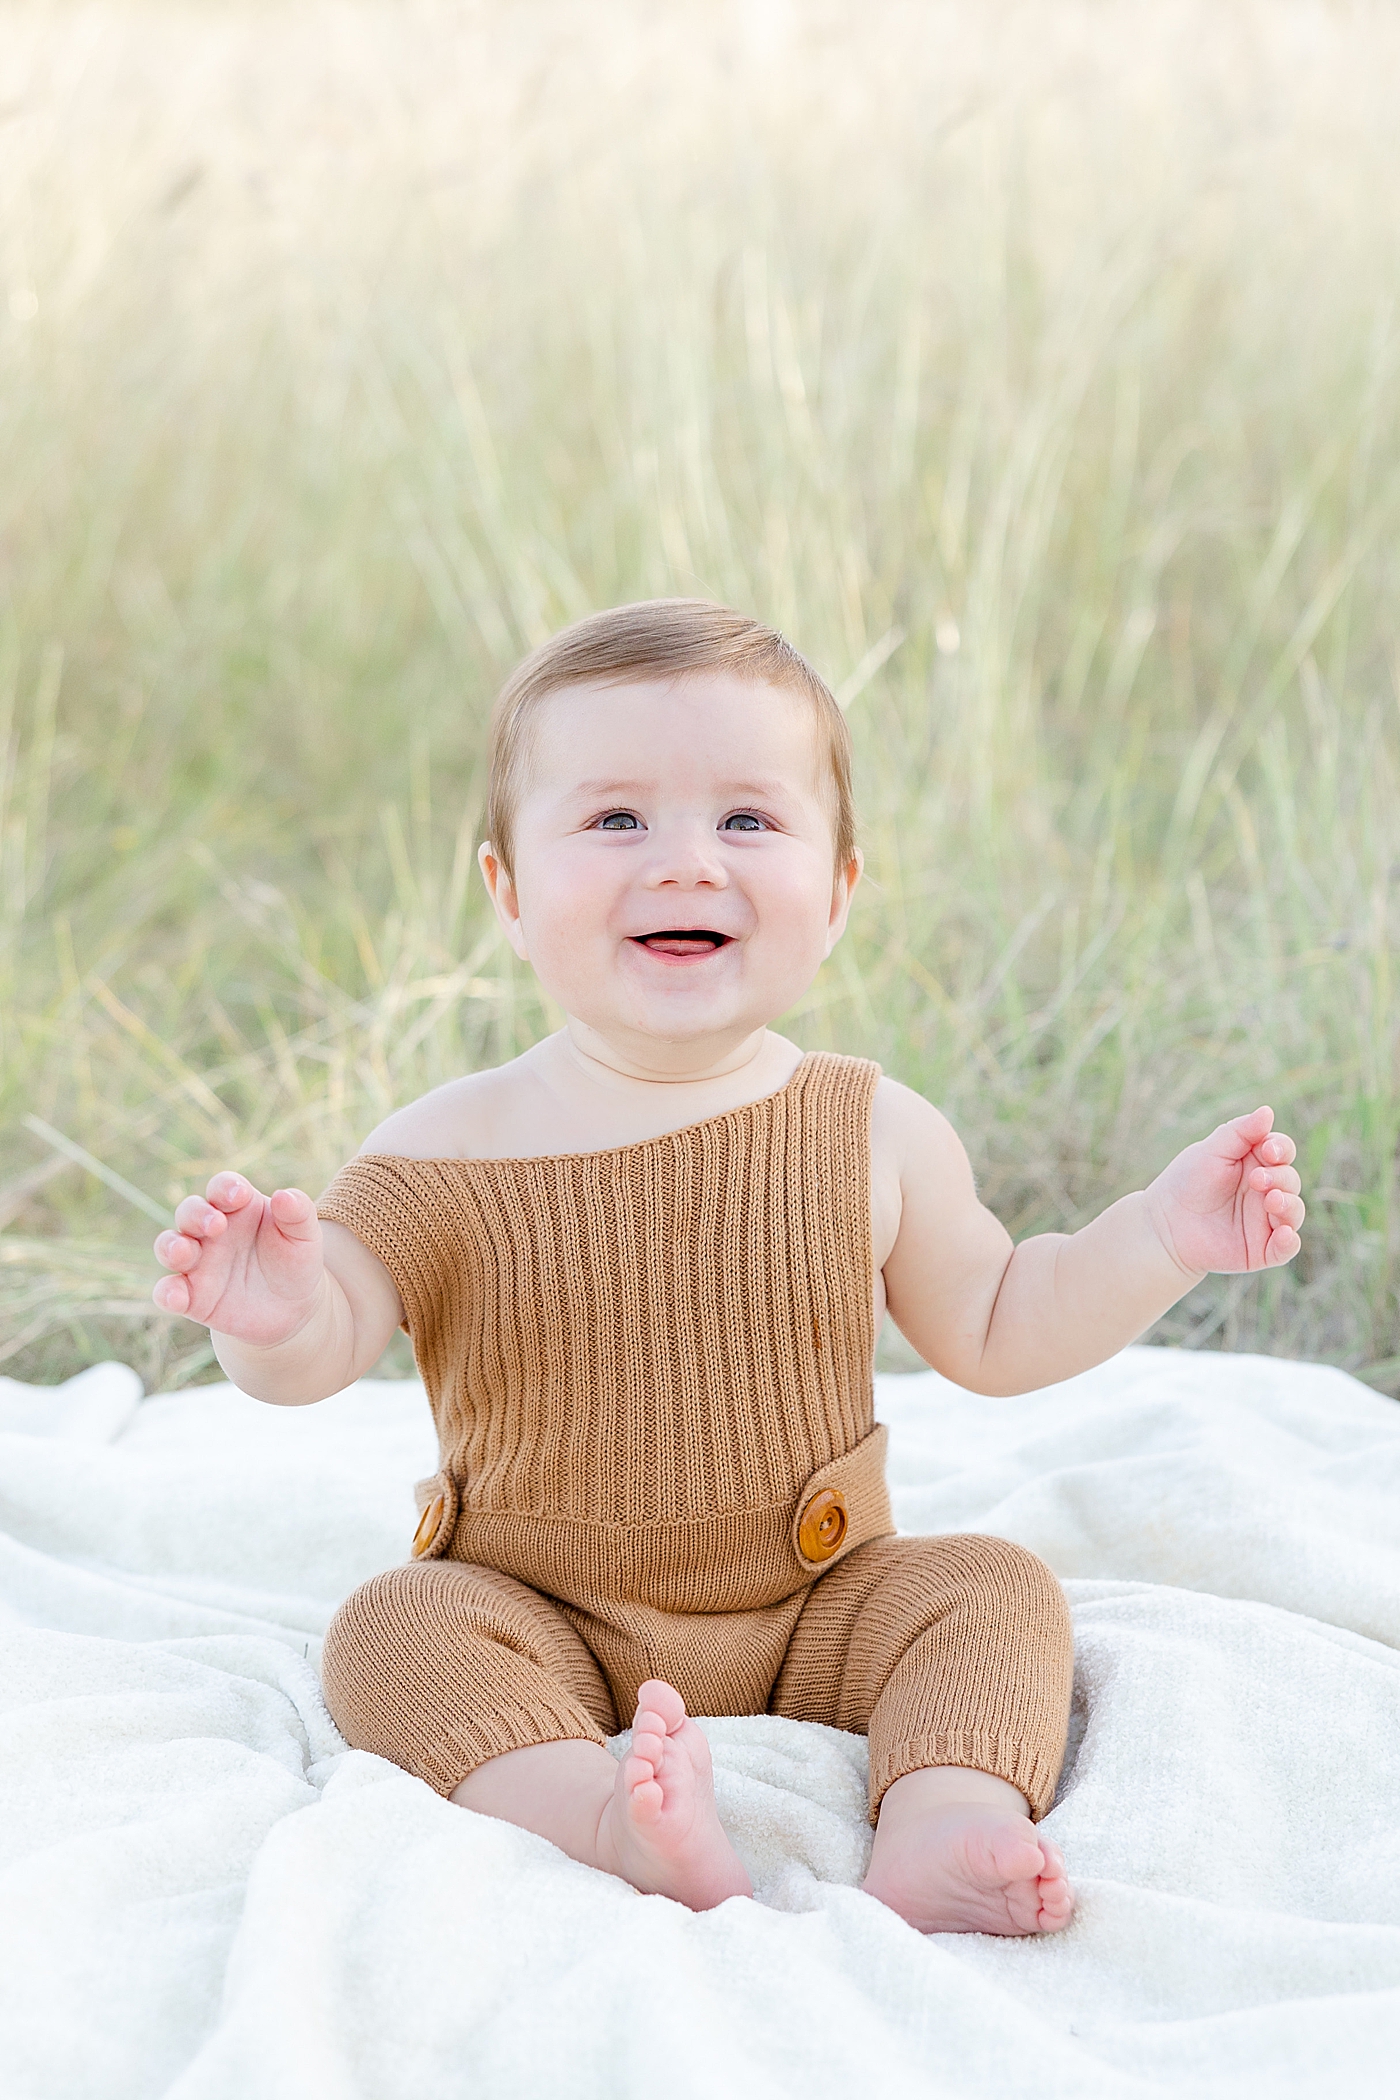 Smiling baby boy sitting on a blanket in the grass | Image by Sana Ahmed Photography